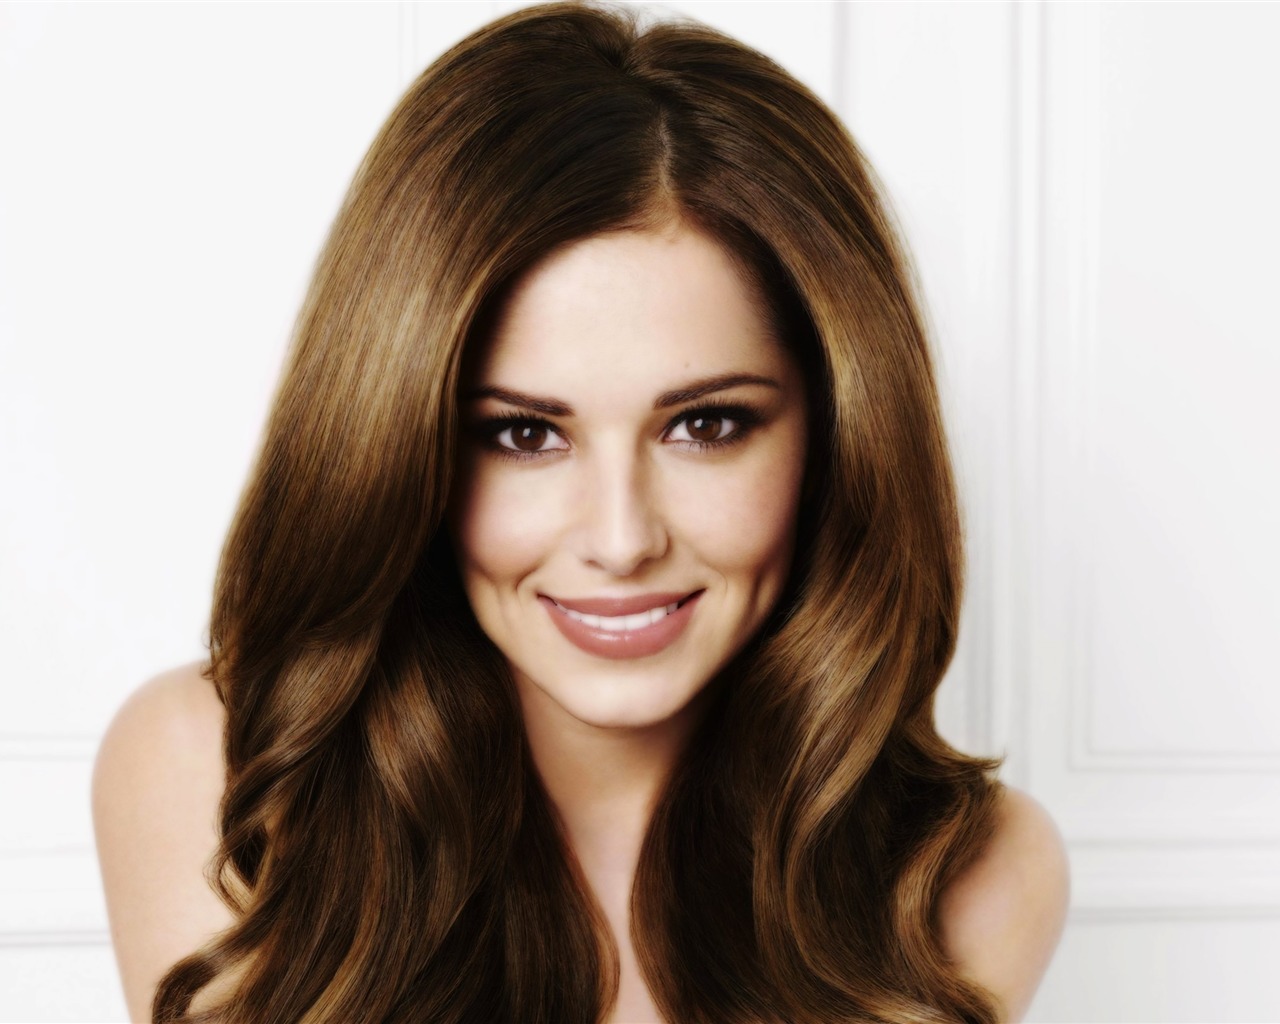 Cheryl Cole #019 - 1280x1024 Wallpapers Pictures Photos Images